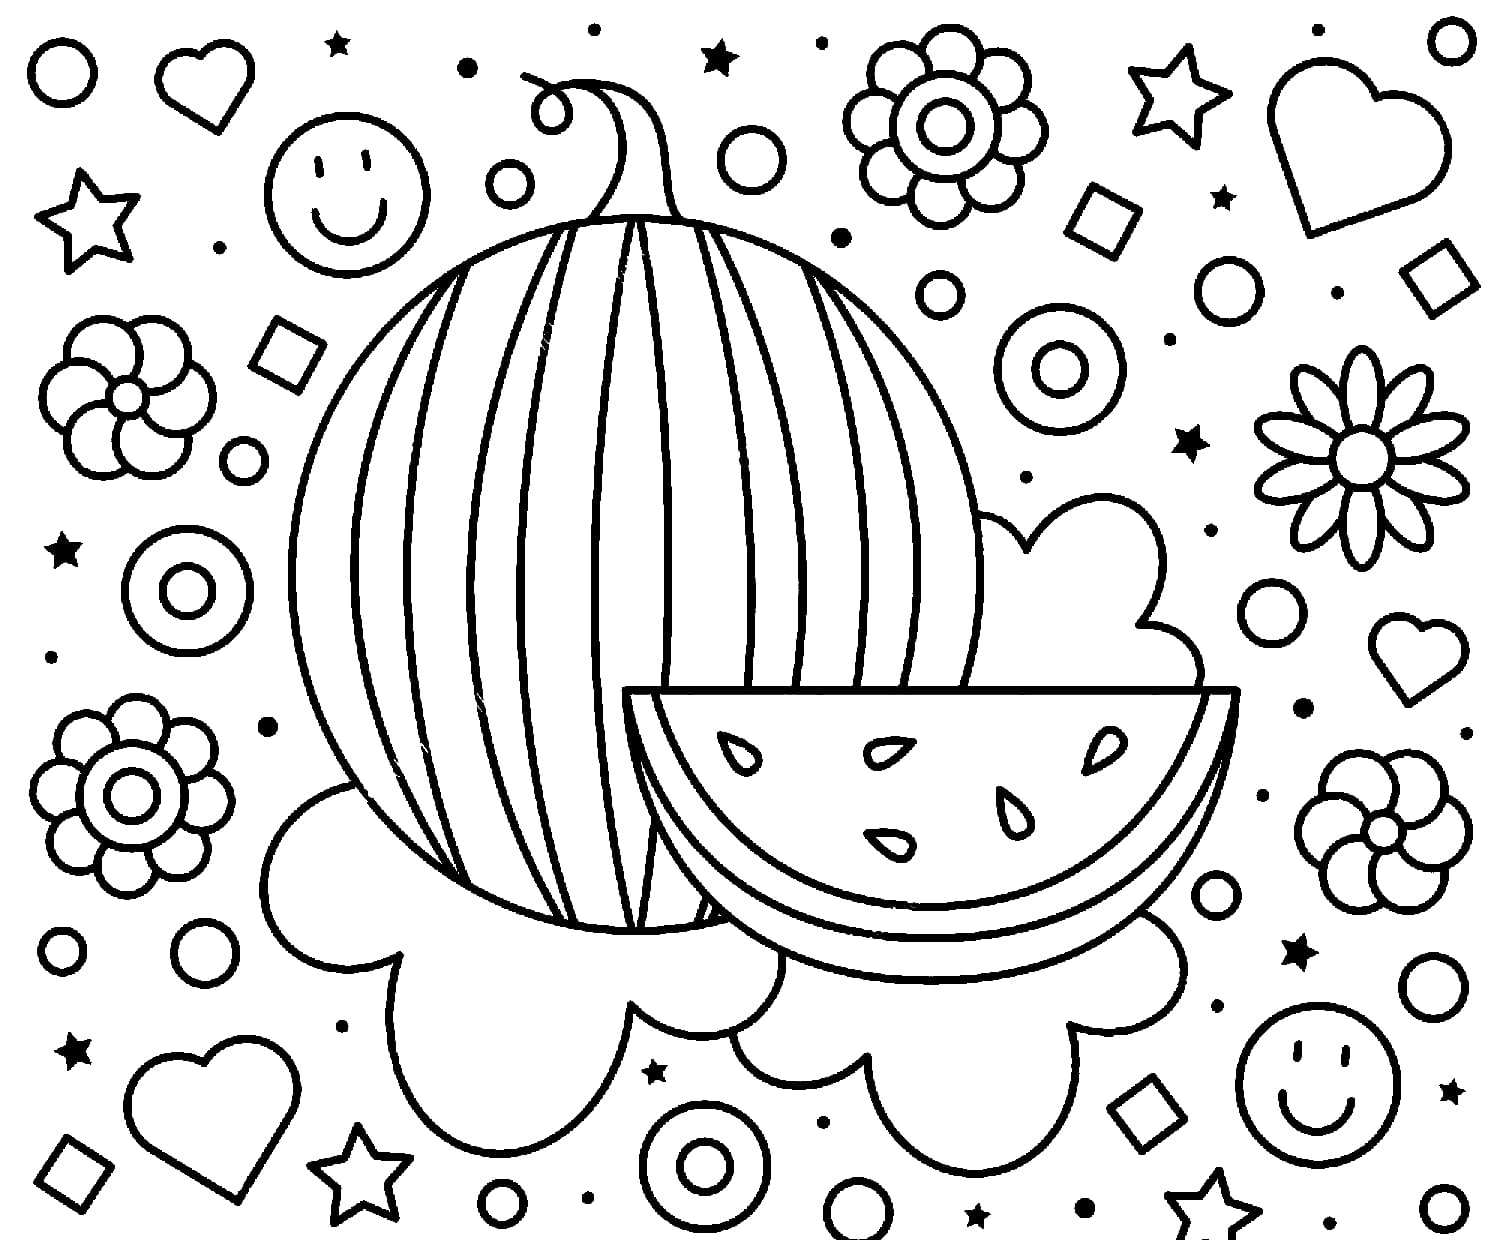 Watermelon coloring pages - Free coloring pages | WONDER DAY — Coloring  pages for children and adults